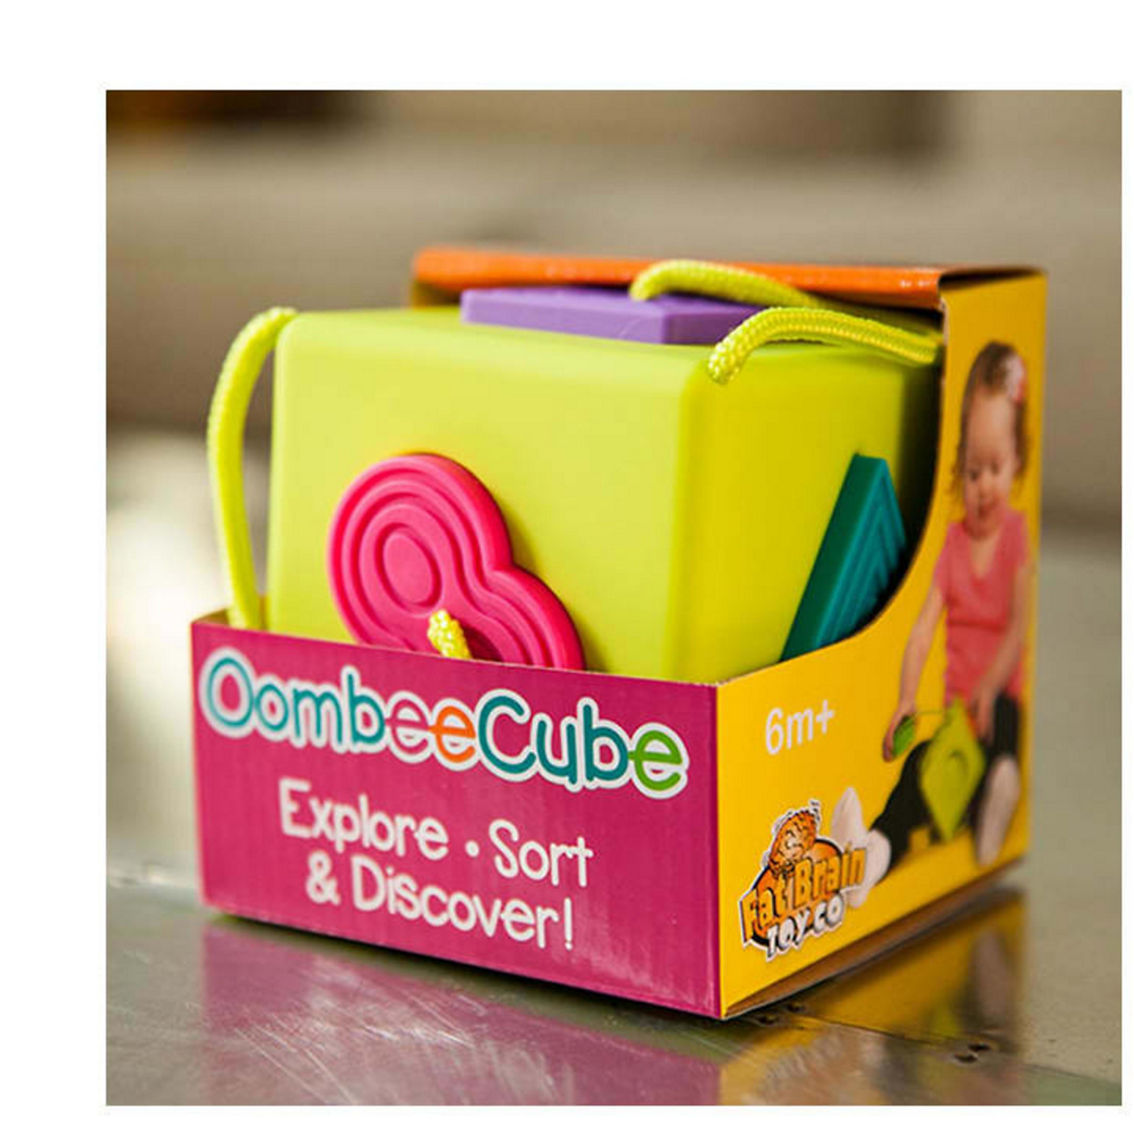 Fat Brain Toy Co. OombeeCube - Image 2 of 5